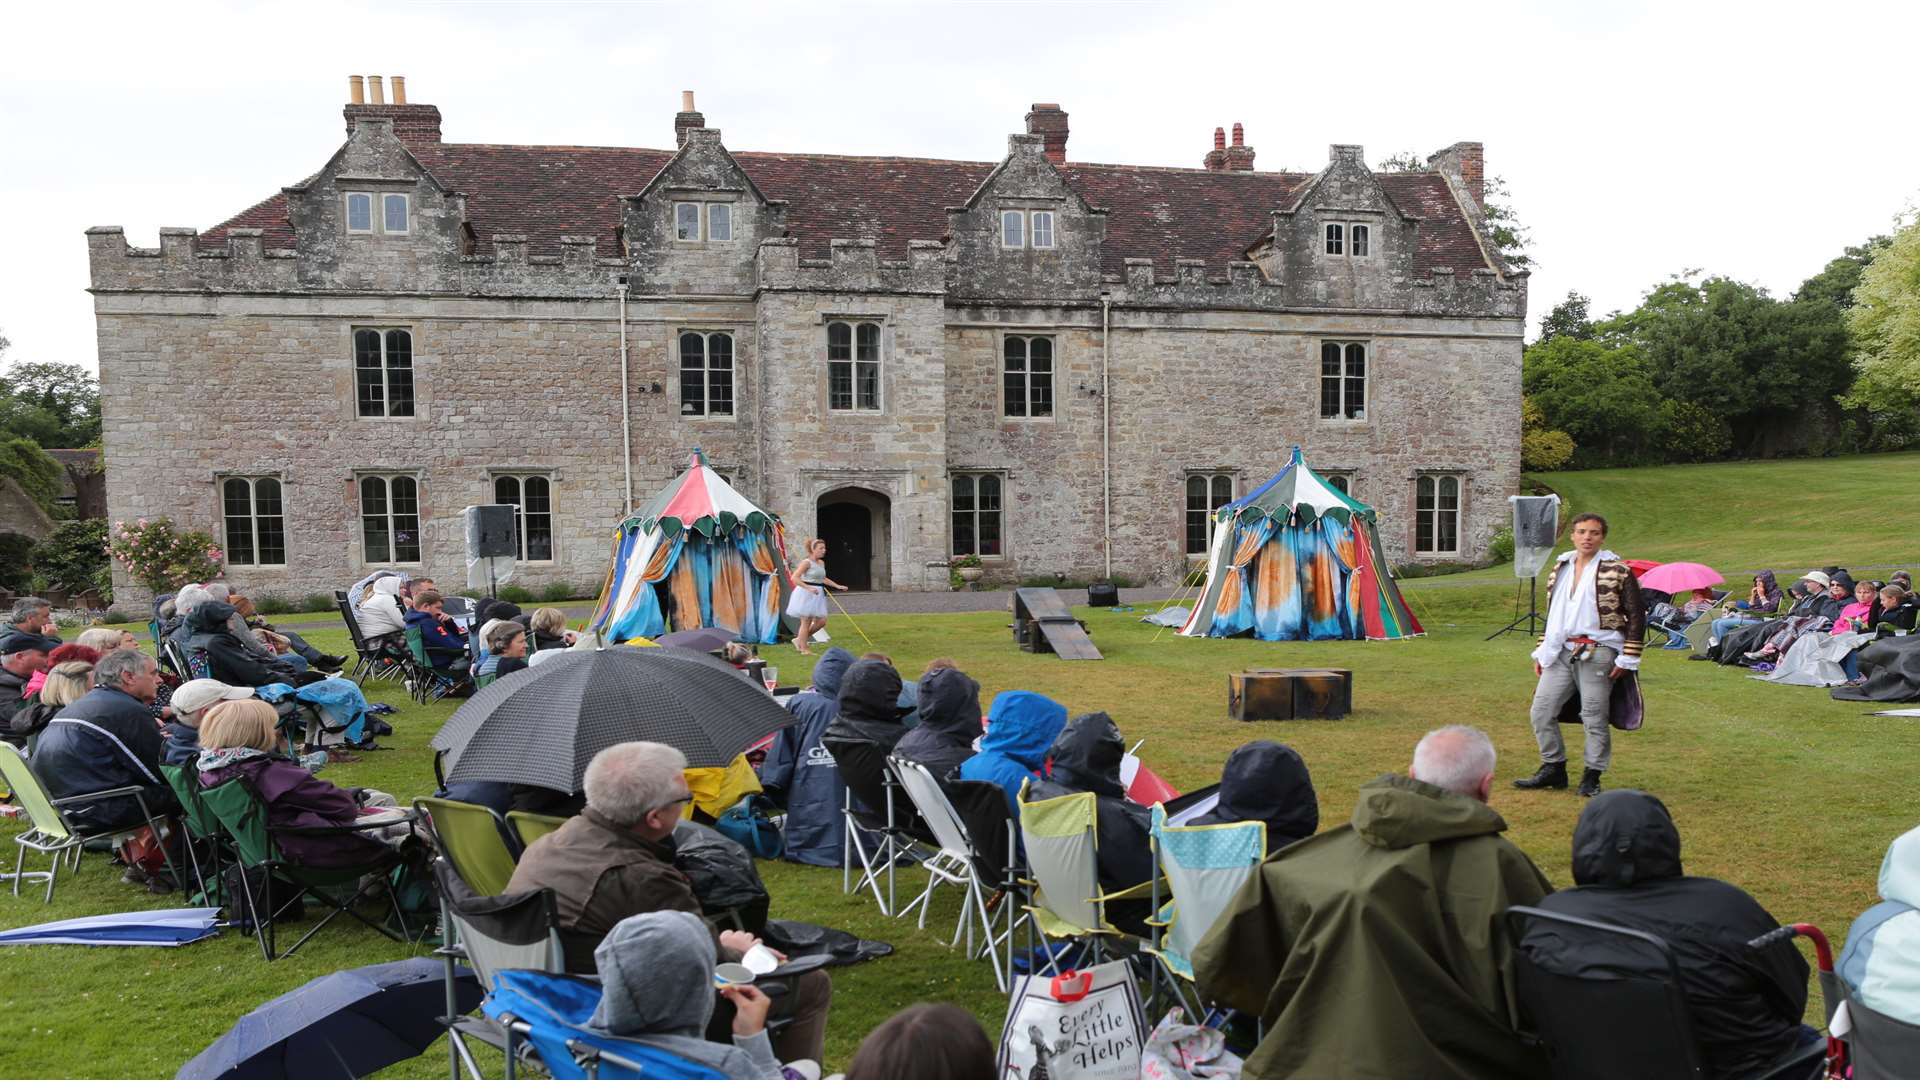 The Changeling Theatre's summer tour starts at Boughton Monchelsea Place near Maidstone